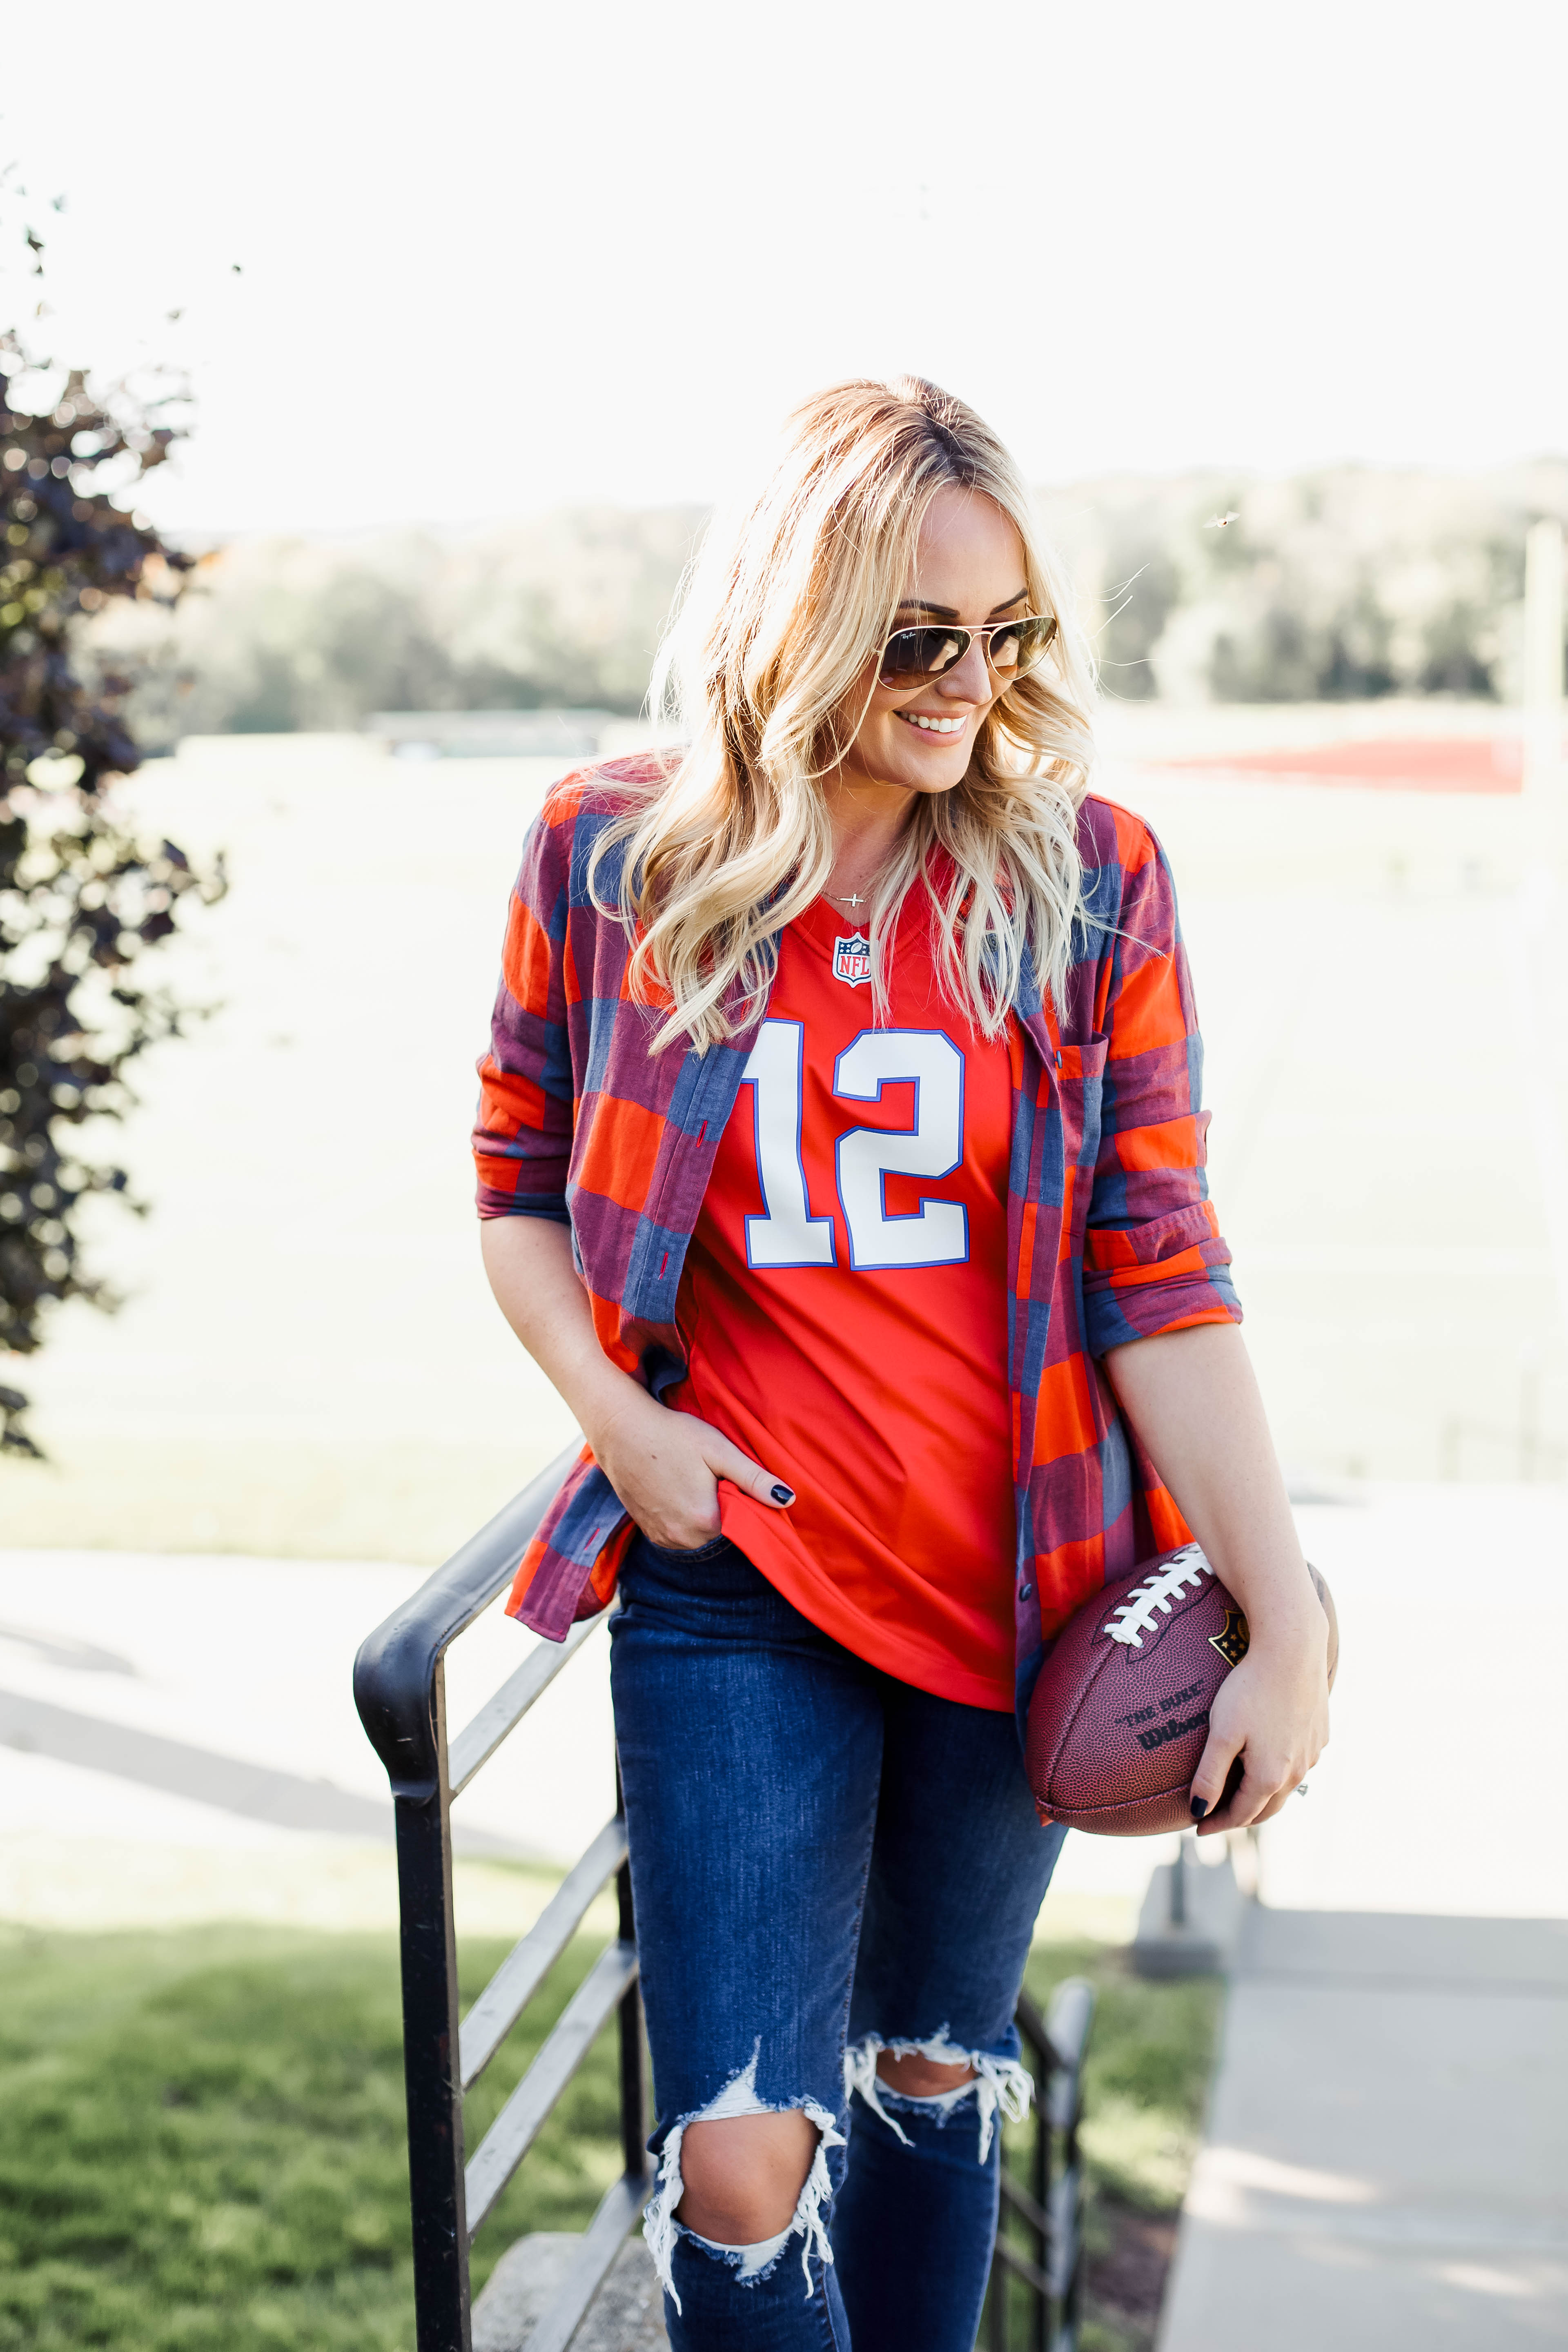 How to Style a Jersey in 10 Ways